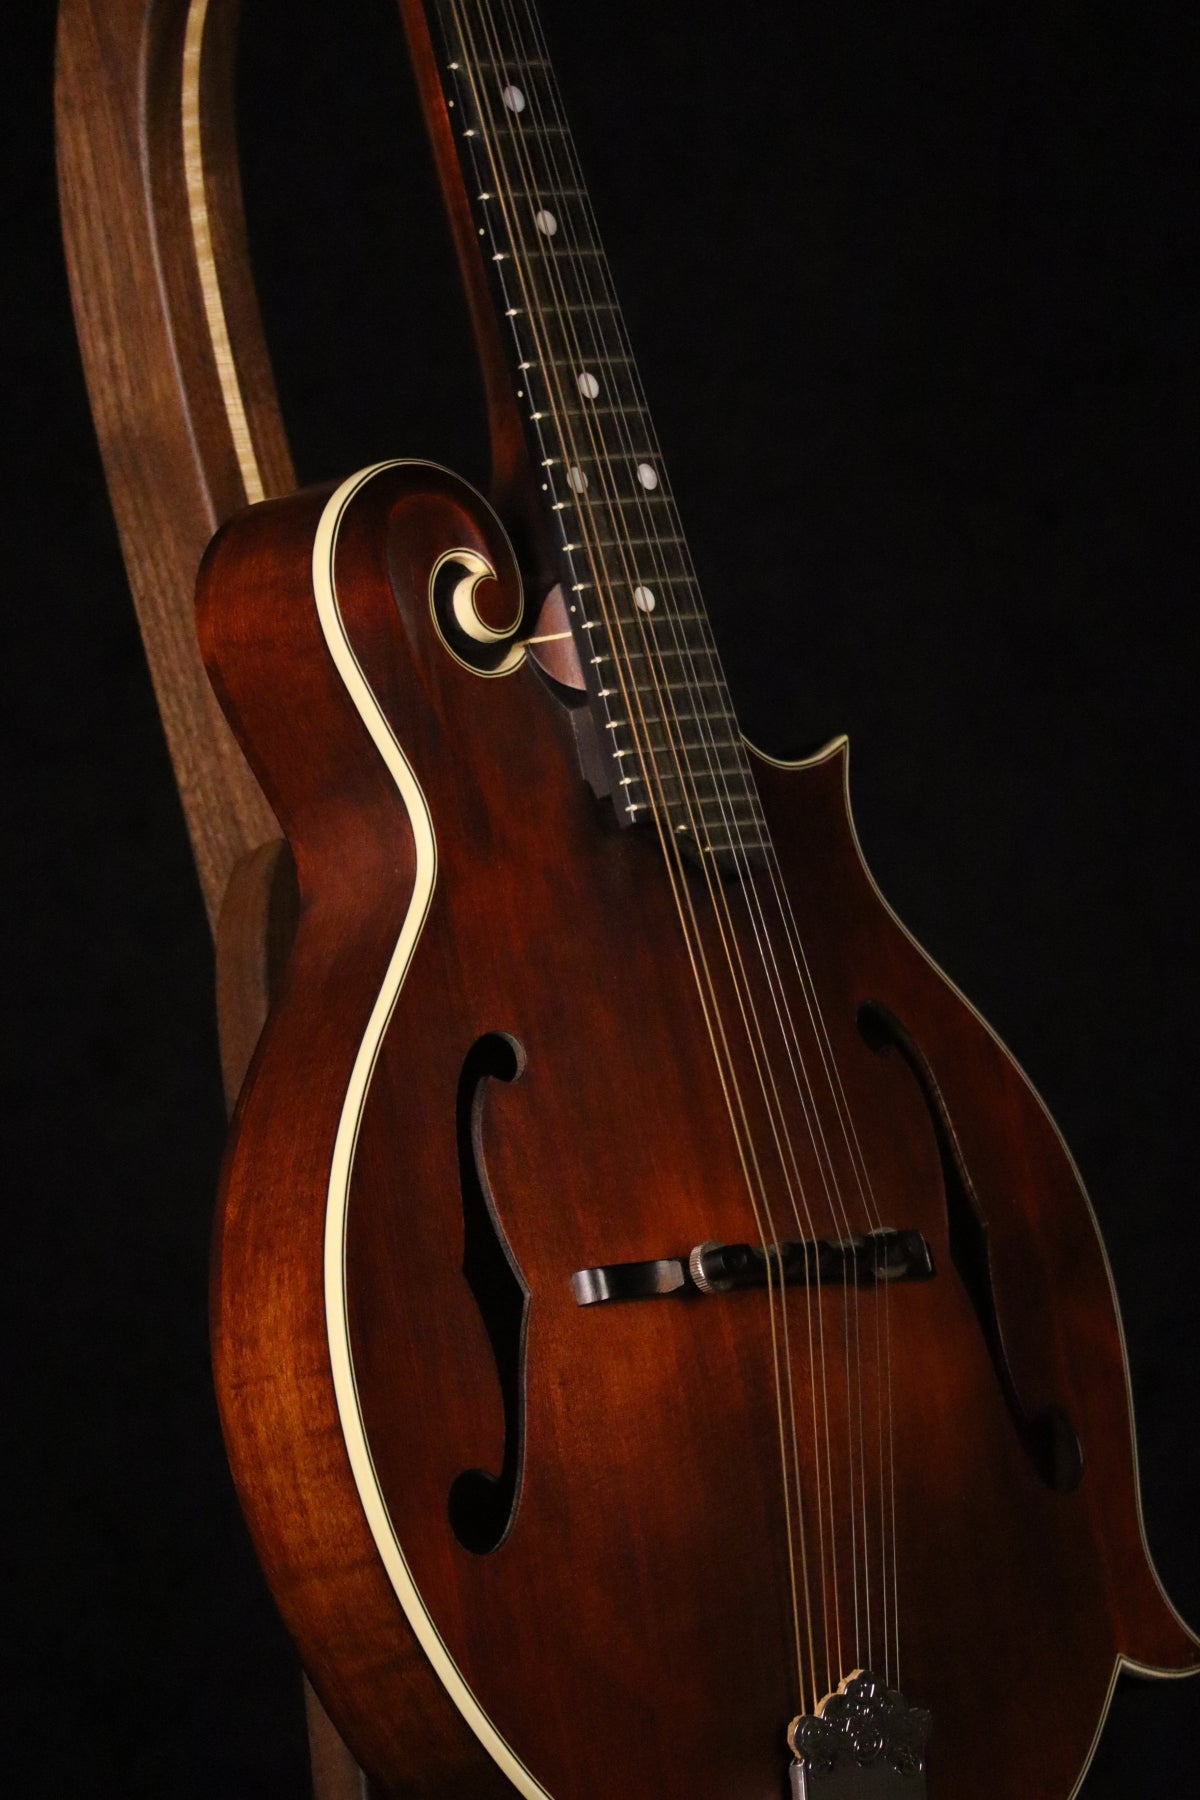 Folding walnut and curly maple wood mandolin floor stand closeup front image with Eastman mandolin